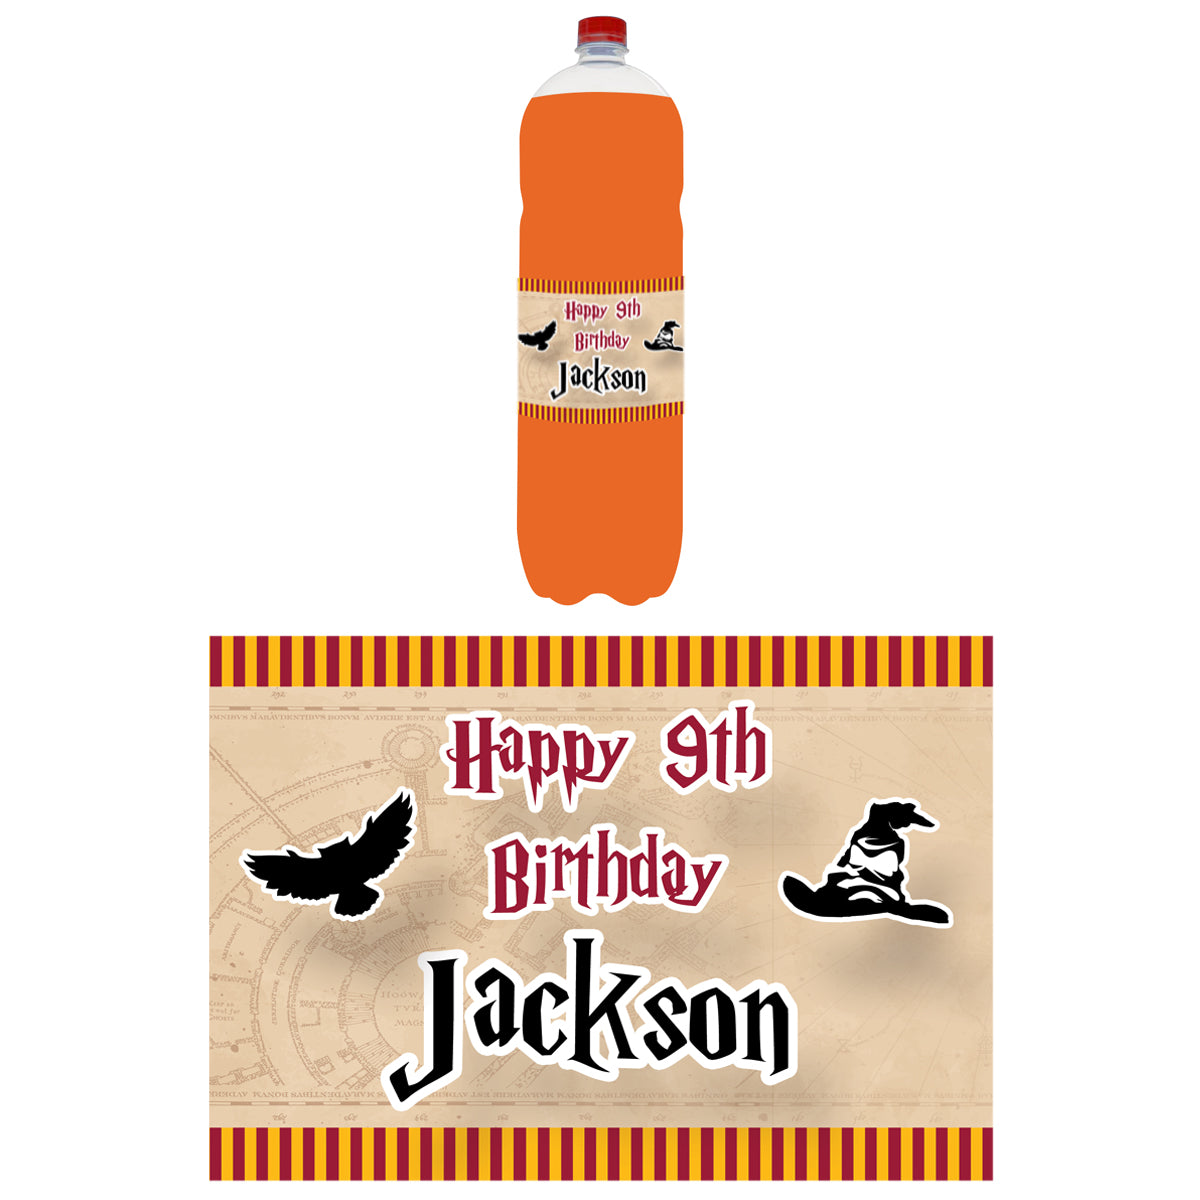 Personalised Bottle Labels - Wizard - Pack of 4